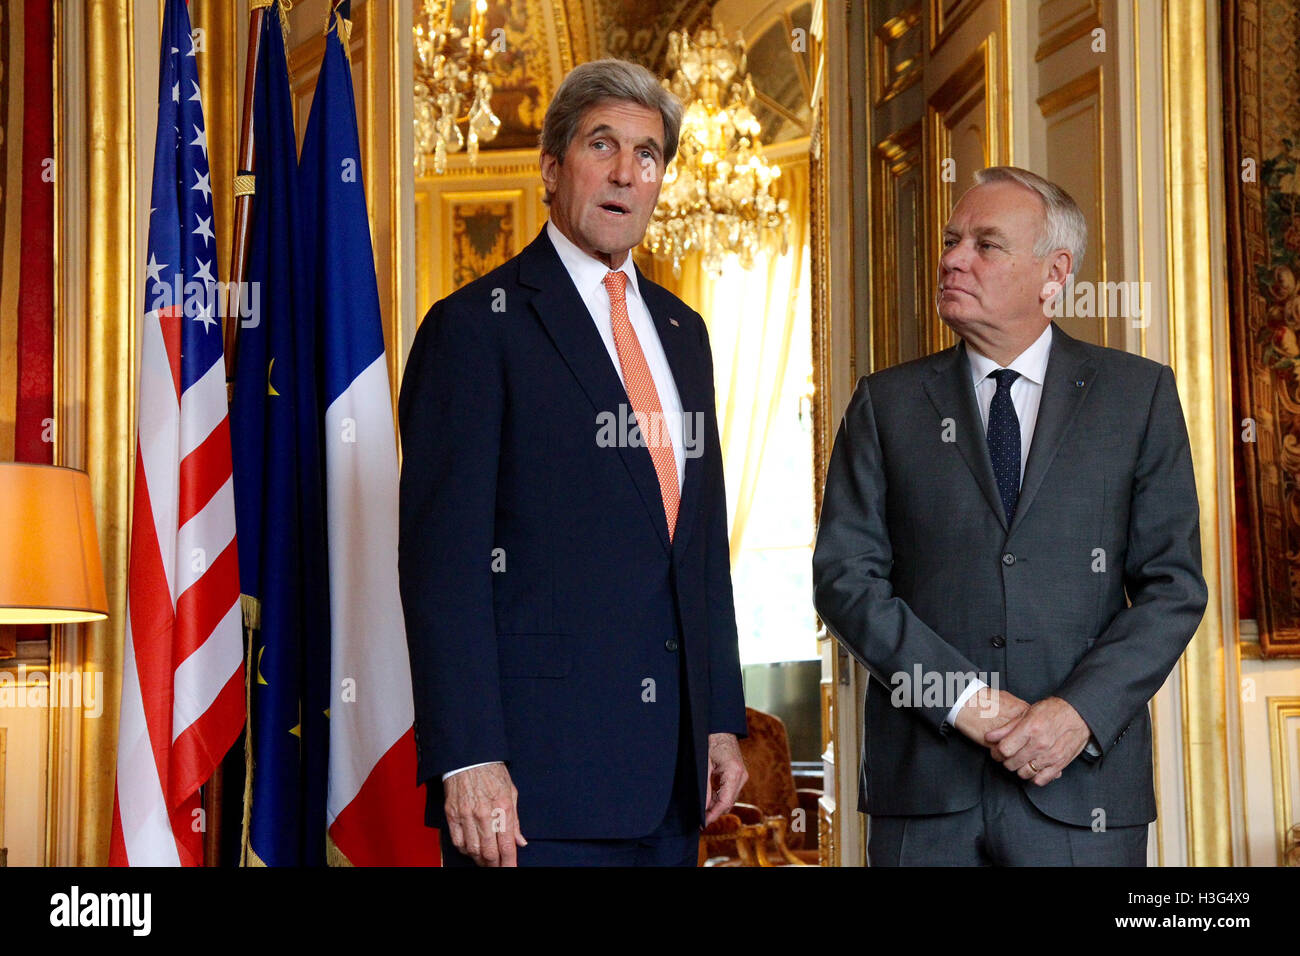 U.S. Secretary of State John Kerry meets with French Foreign Minister Jean-Marc Ayrault at the French Ministry of Foreign Affairs in Paris, France on July 30, 2016. Stock Photo